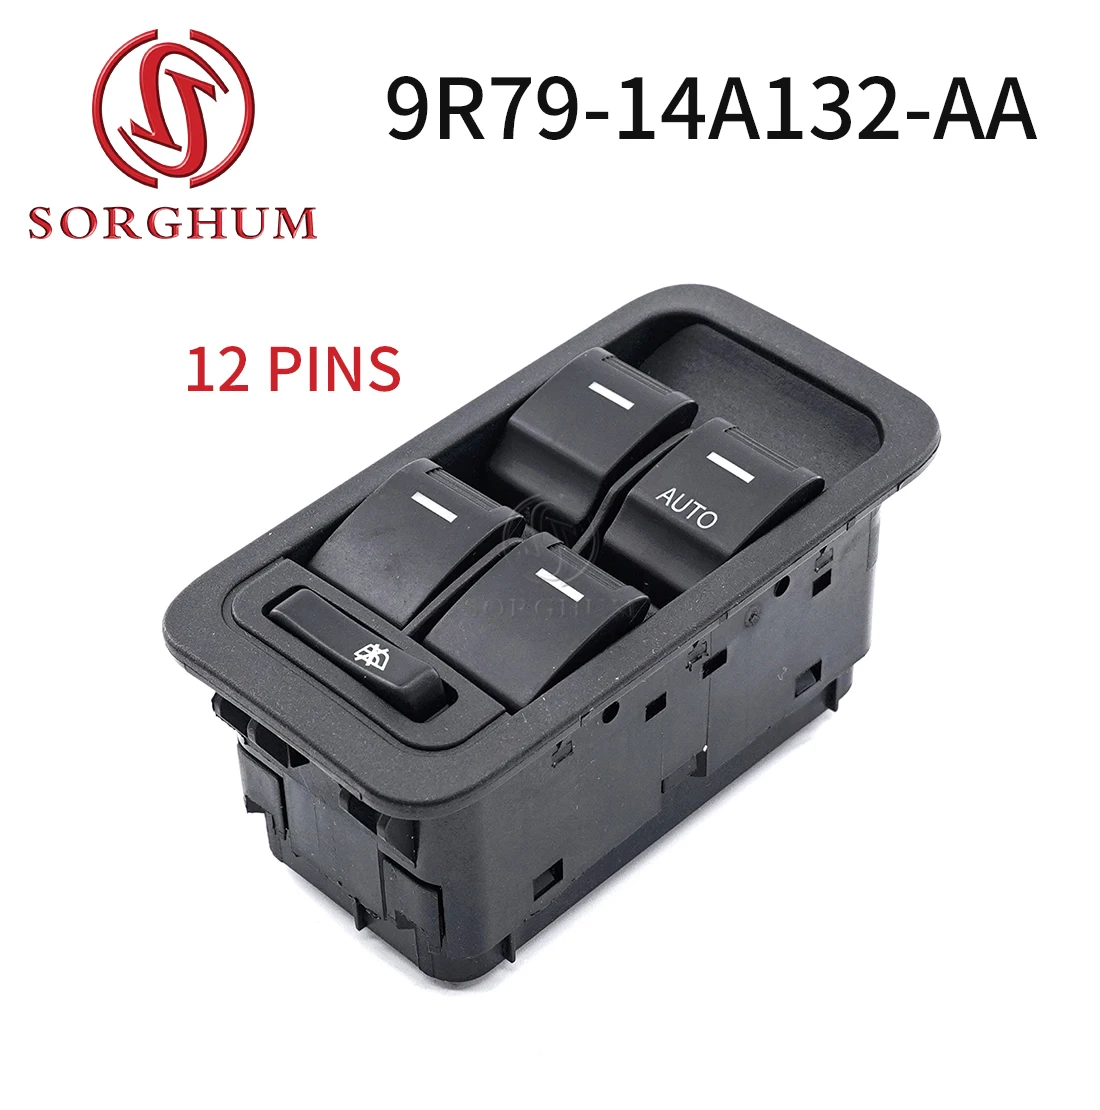 

Sorghum 9R79-14A132-AA Car RHD Right Driver Power Window Master Switch Button For Ford Territory SX SY TX SY14A132C 9R7914A132AA